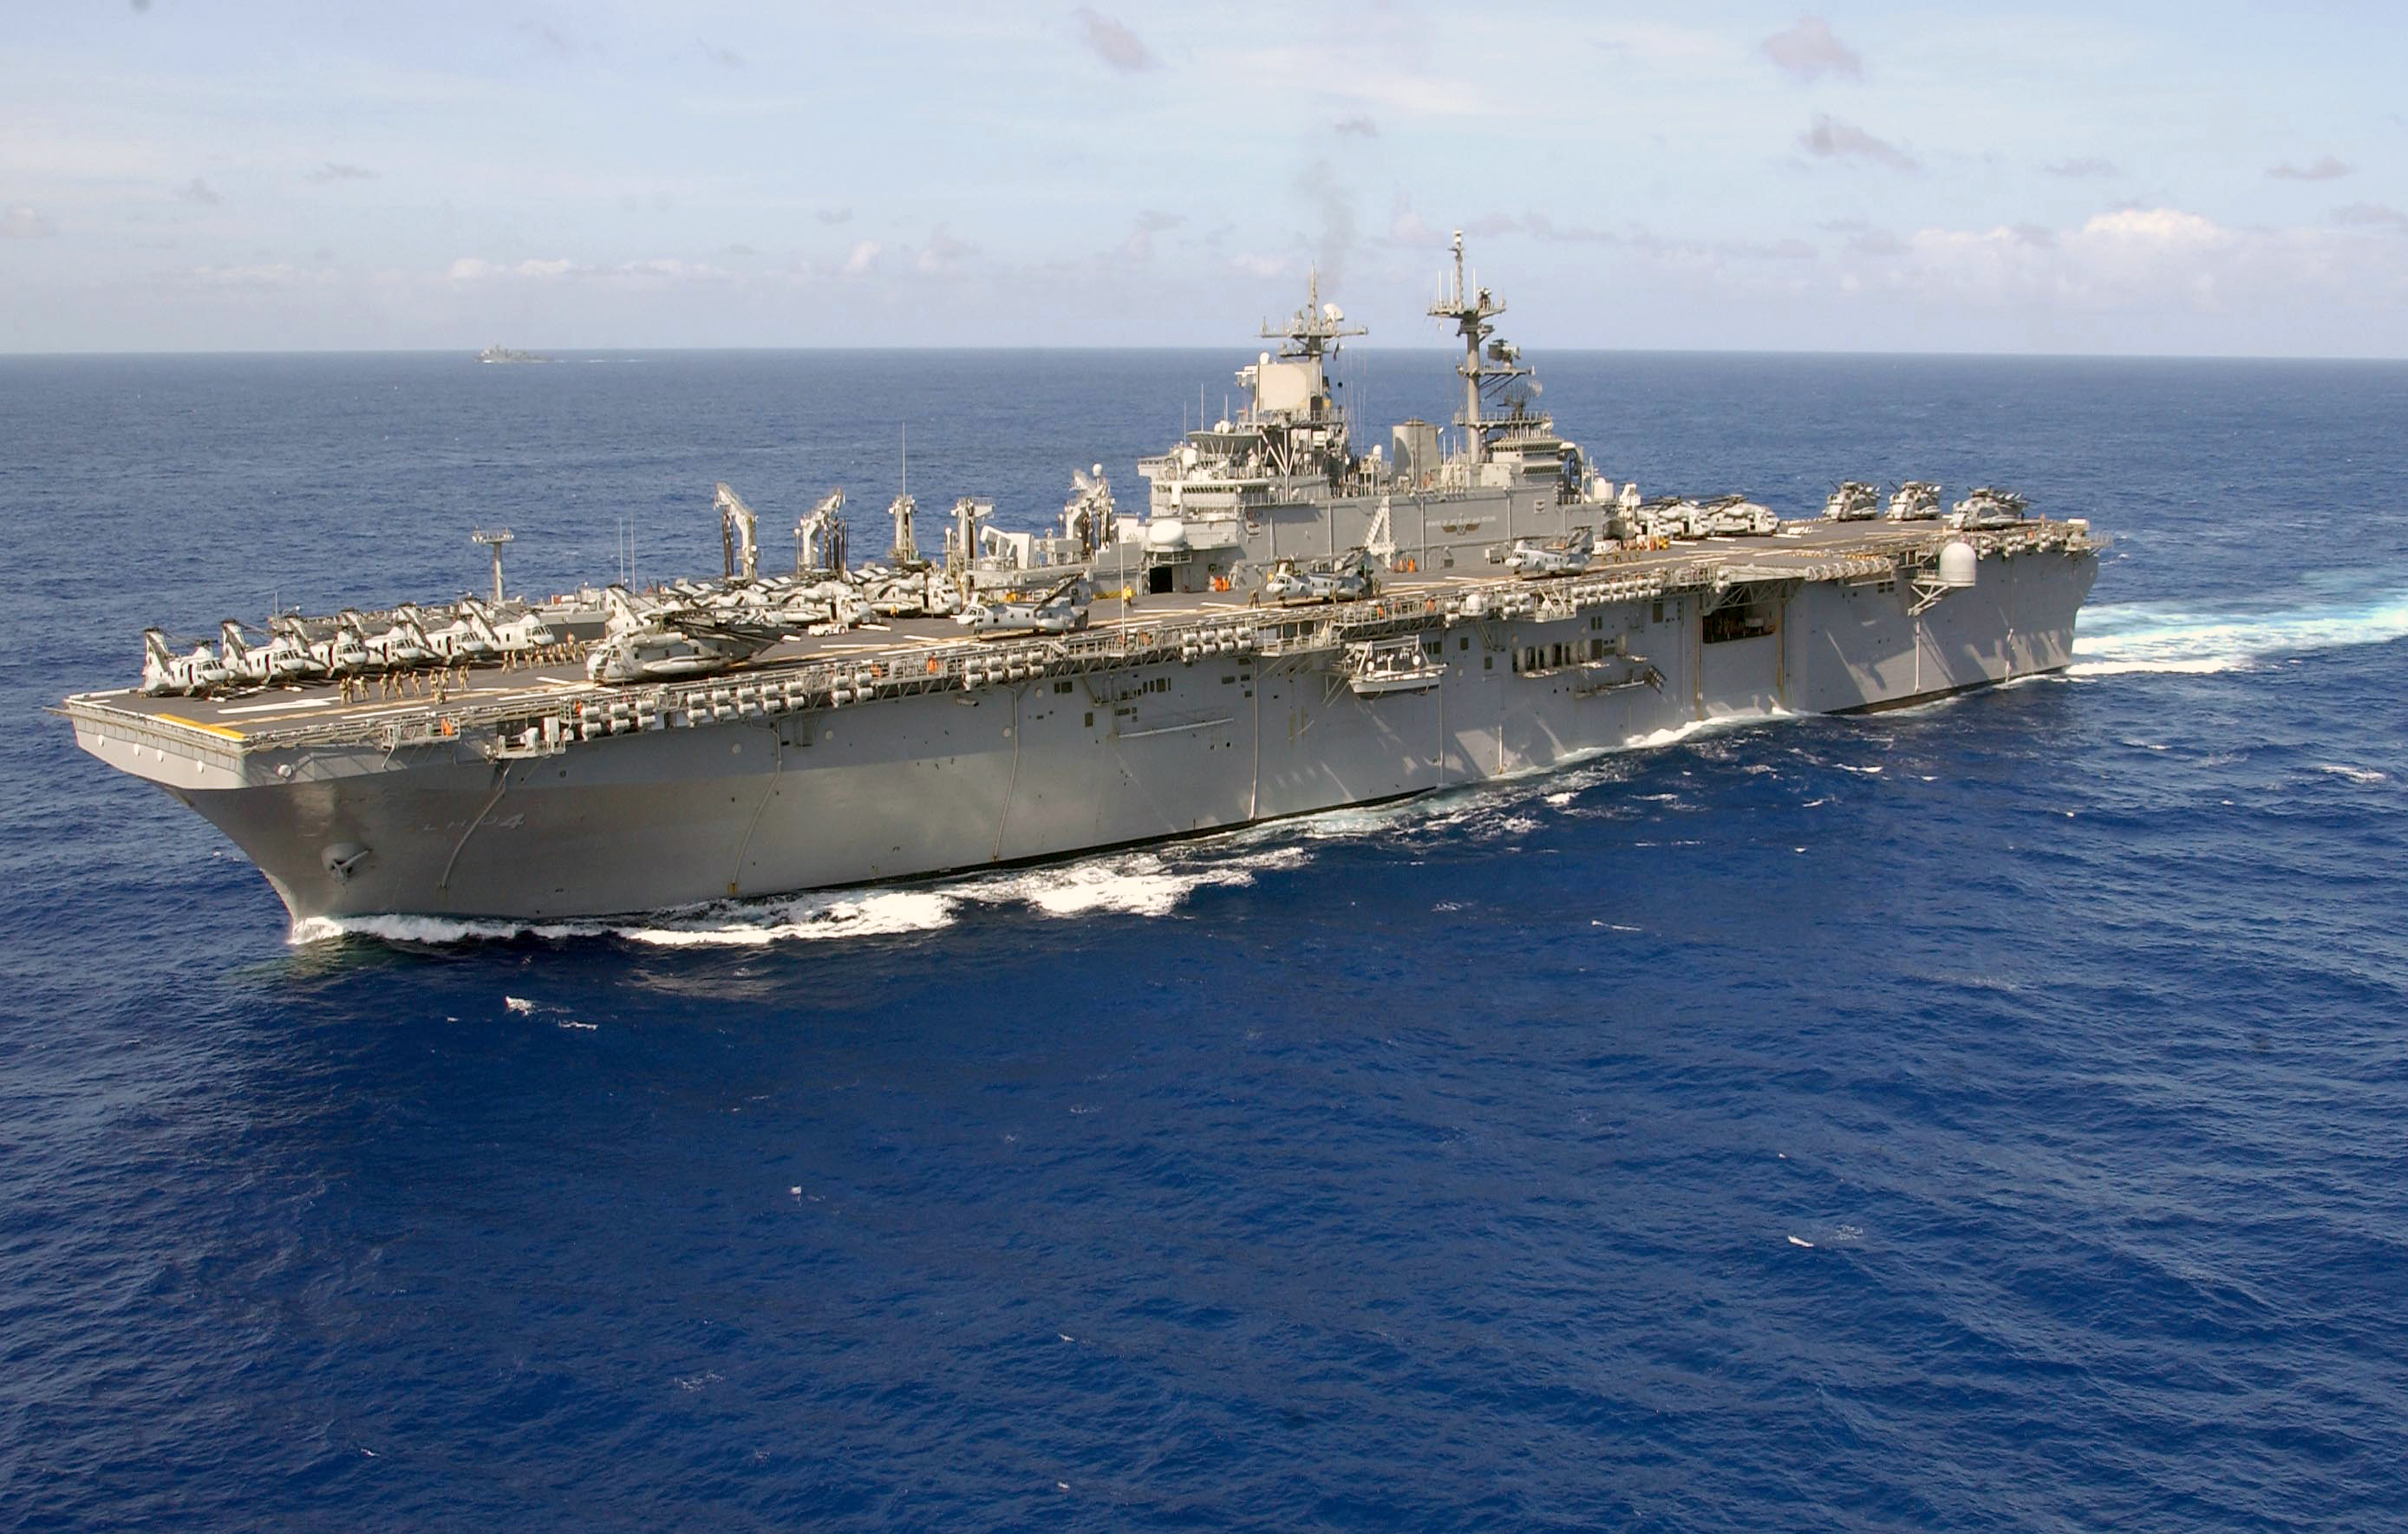 Amazing USS Boxer (LHD-4) Pictures & Backgrounds